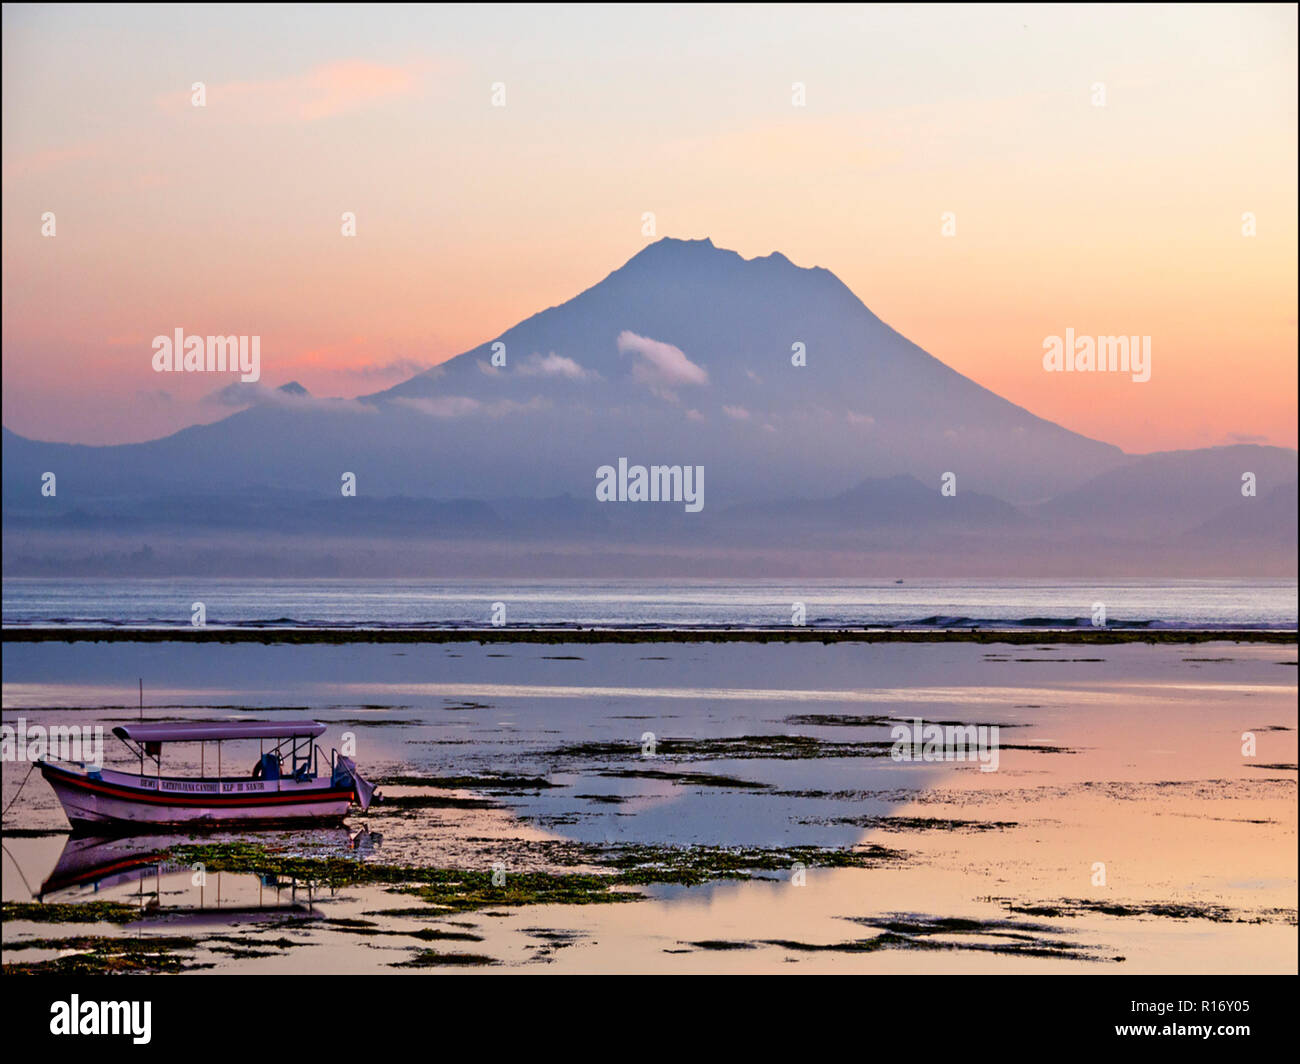 Early morning sunrise overlooking Mount Agung in Sanur Bali Indonesia. Stock Photo